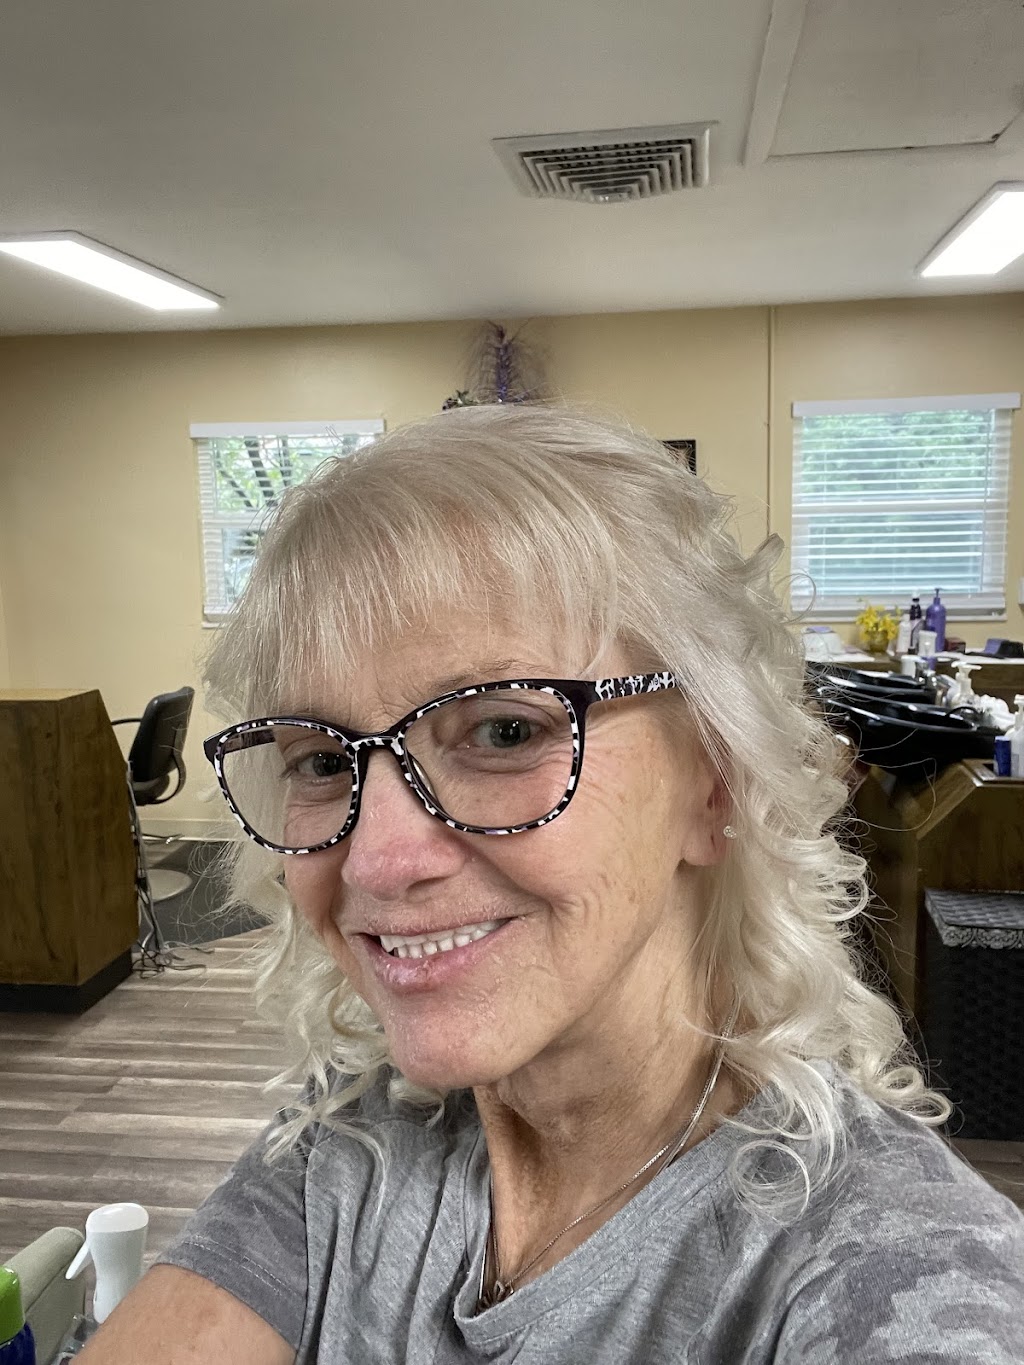 Haircuts By Denise | 901 Indian River Blvd W, Edgewater, FL 32132 | Phone: (386) 871-3188